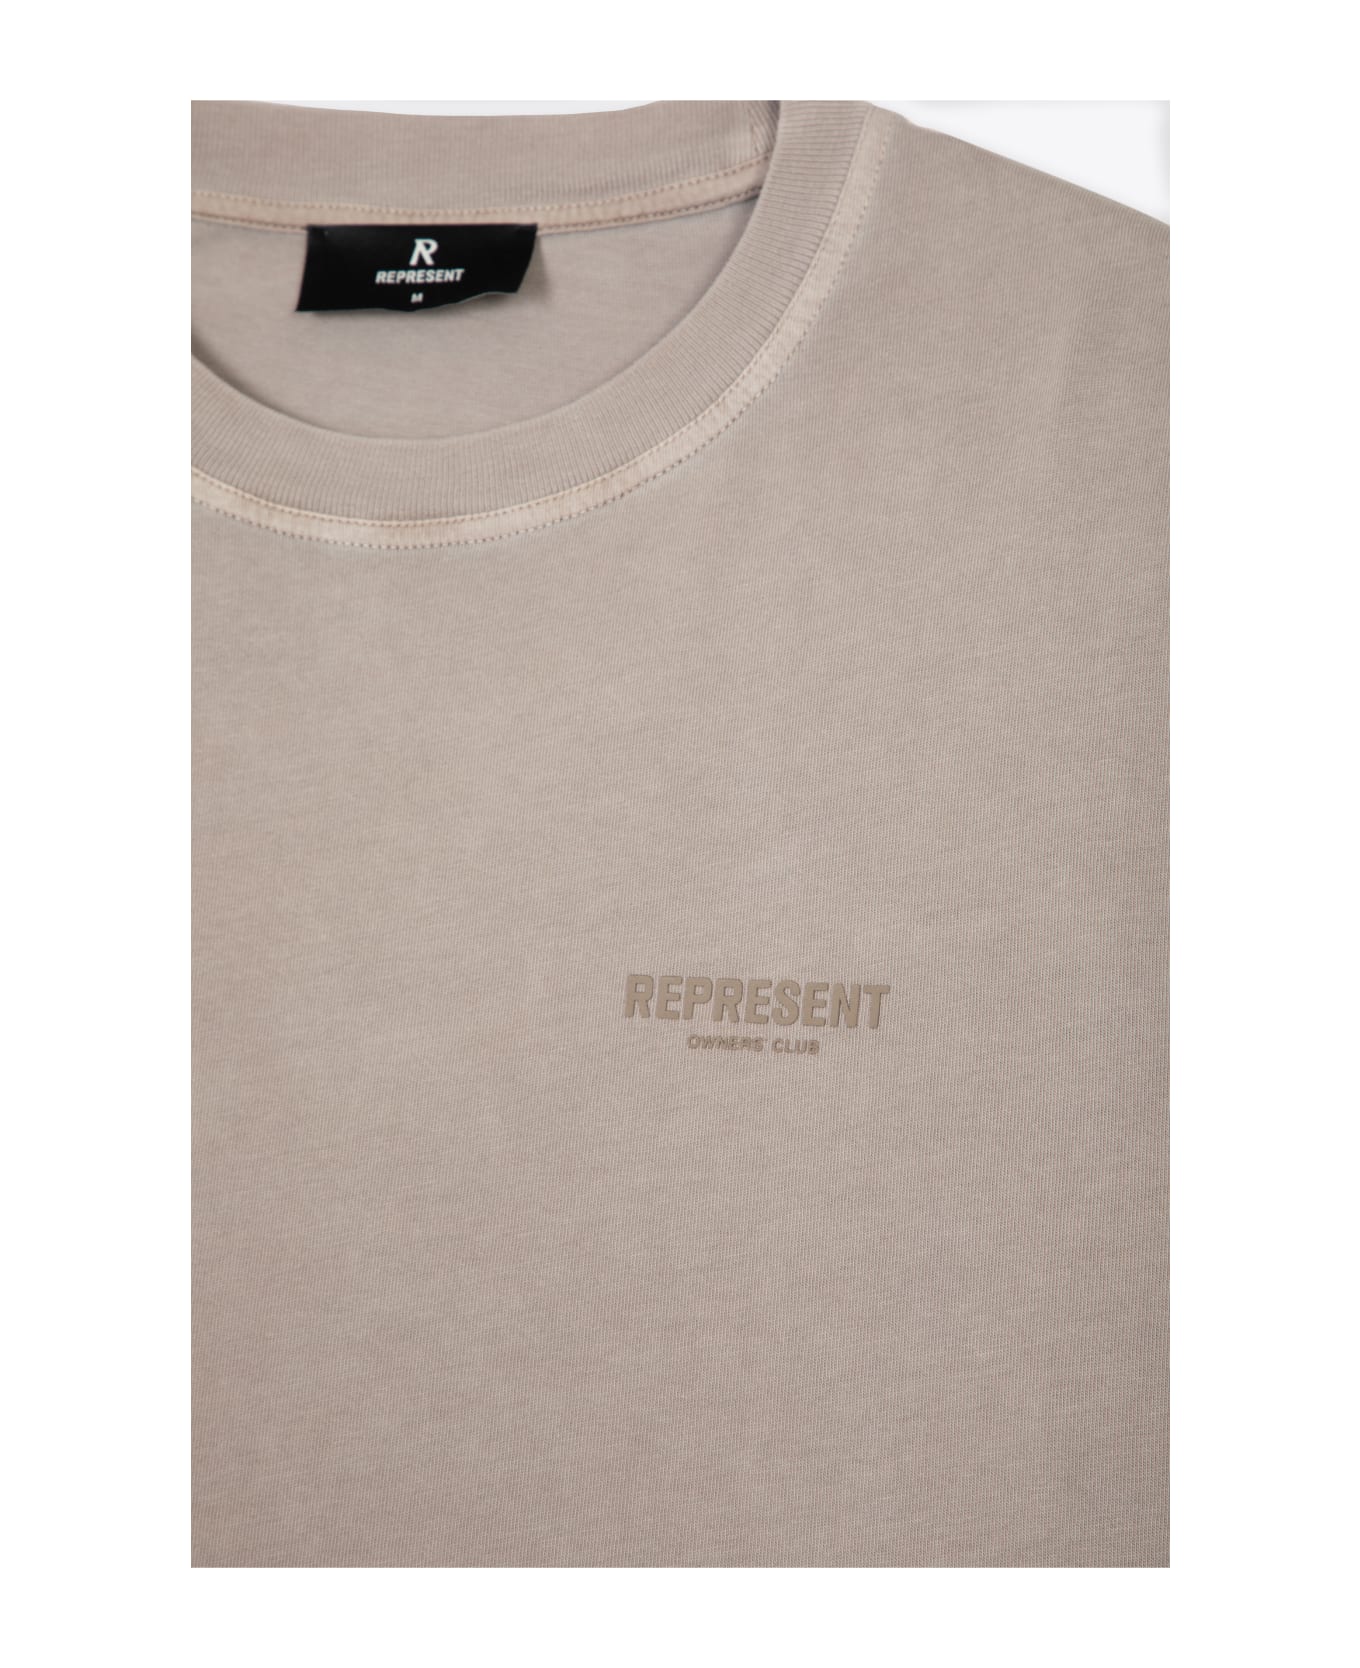 REPRESENT Owners Club T-shirt Faeded light browncotton t-shirt with logo - Owners Club T-shirt - Beige scuro